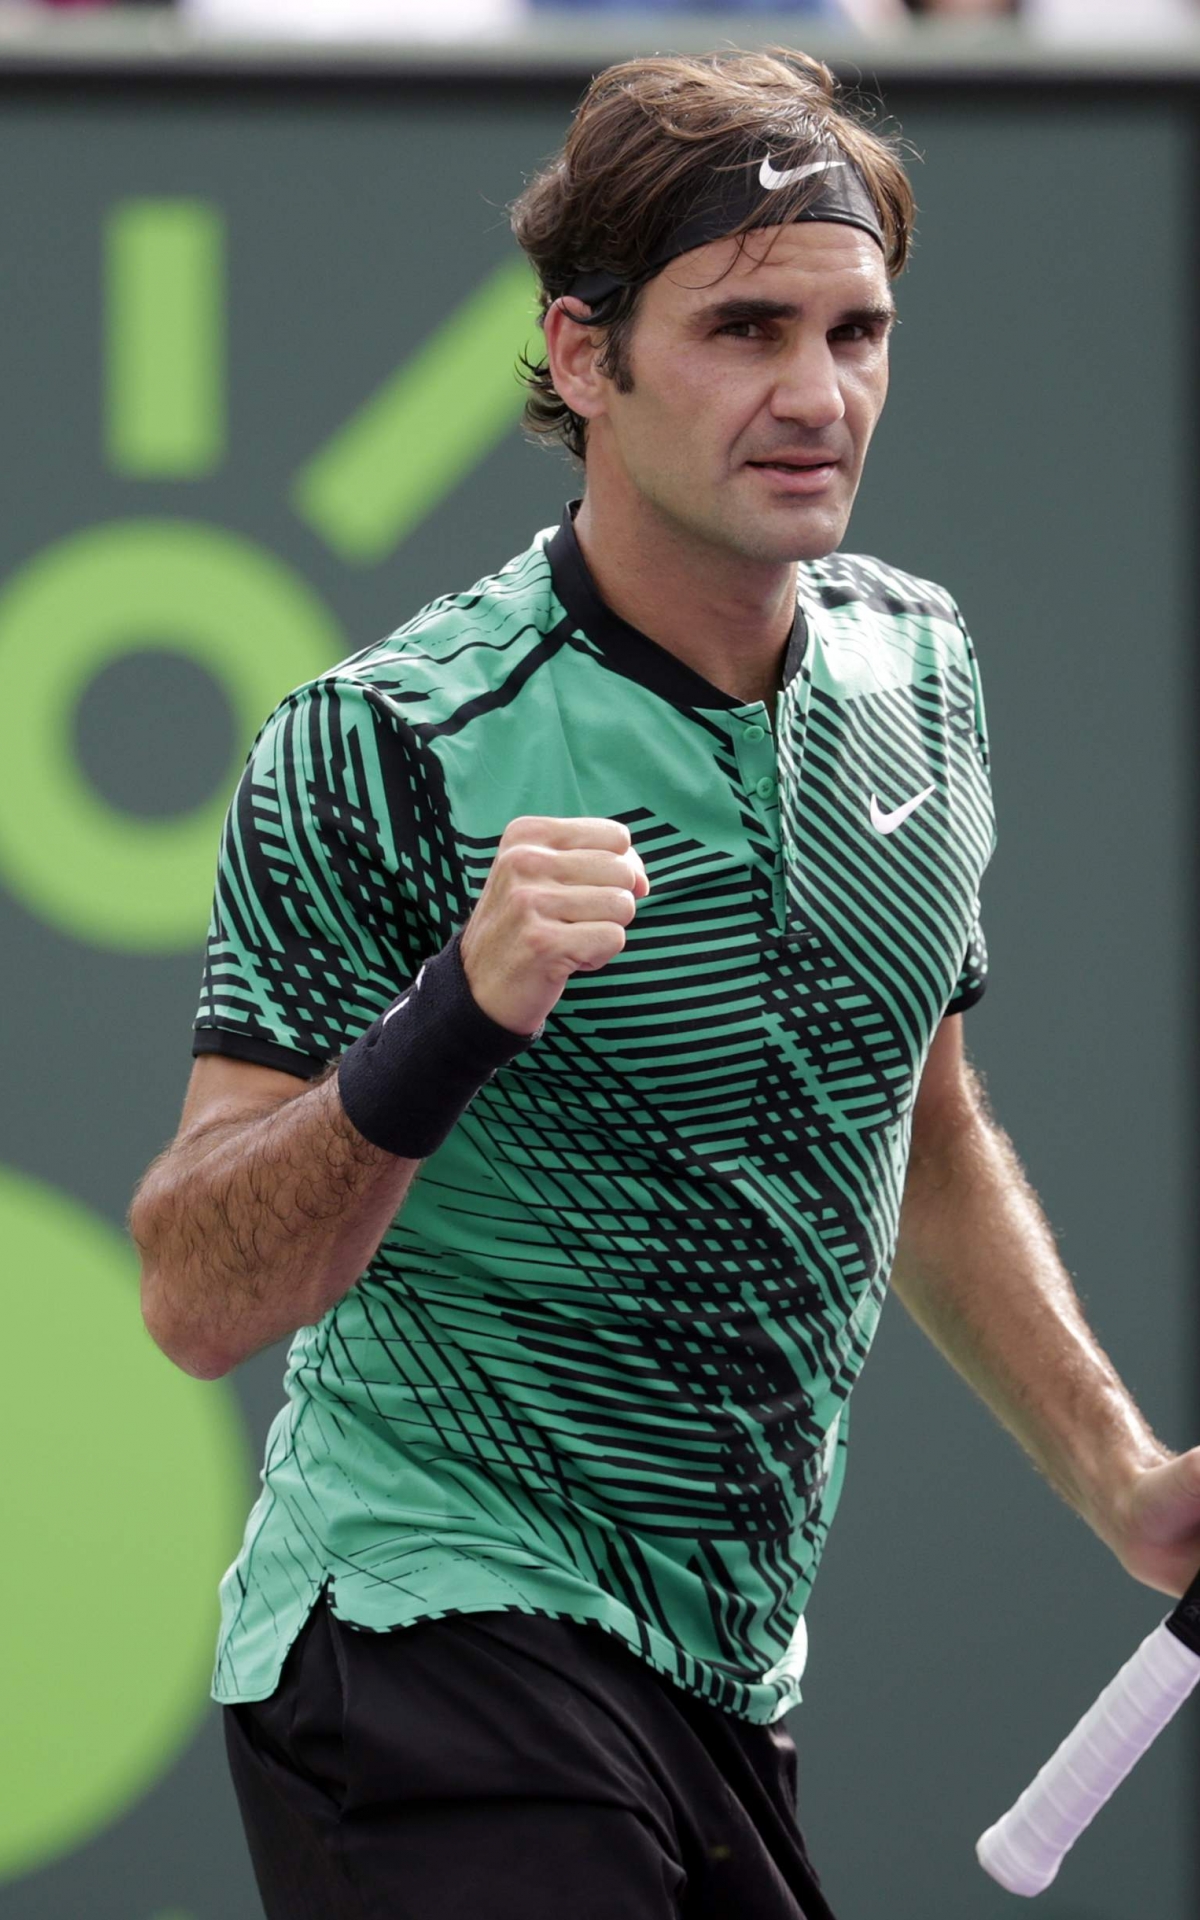 Miami Opens Future Its A Hard One Federer Says The